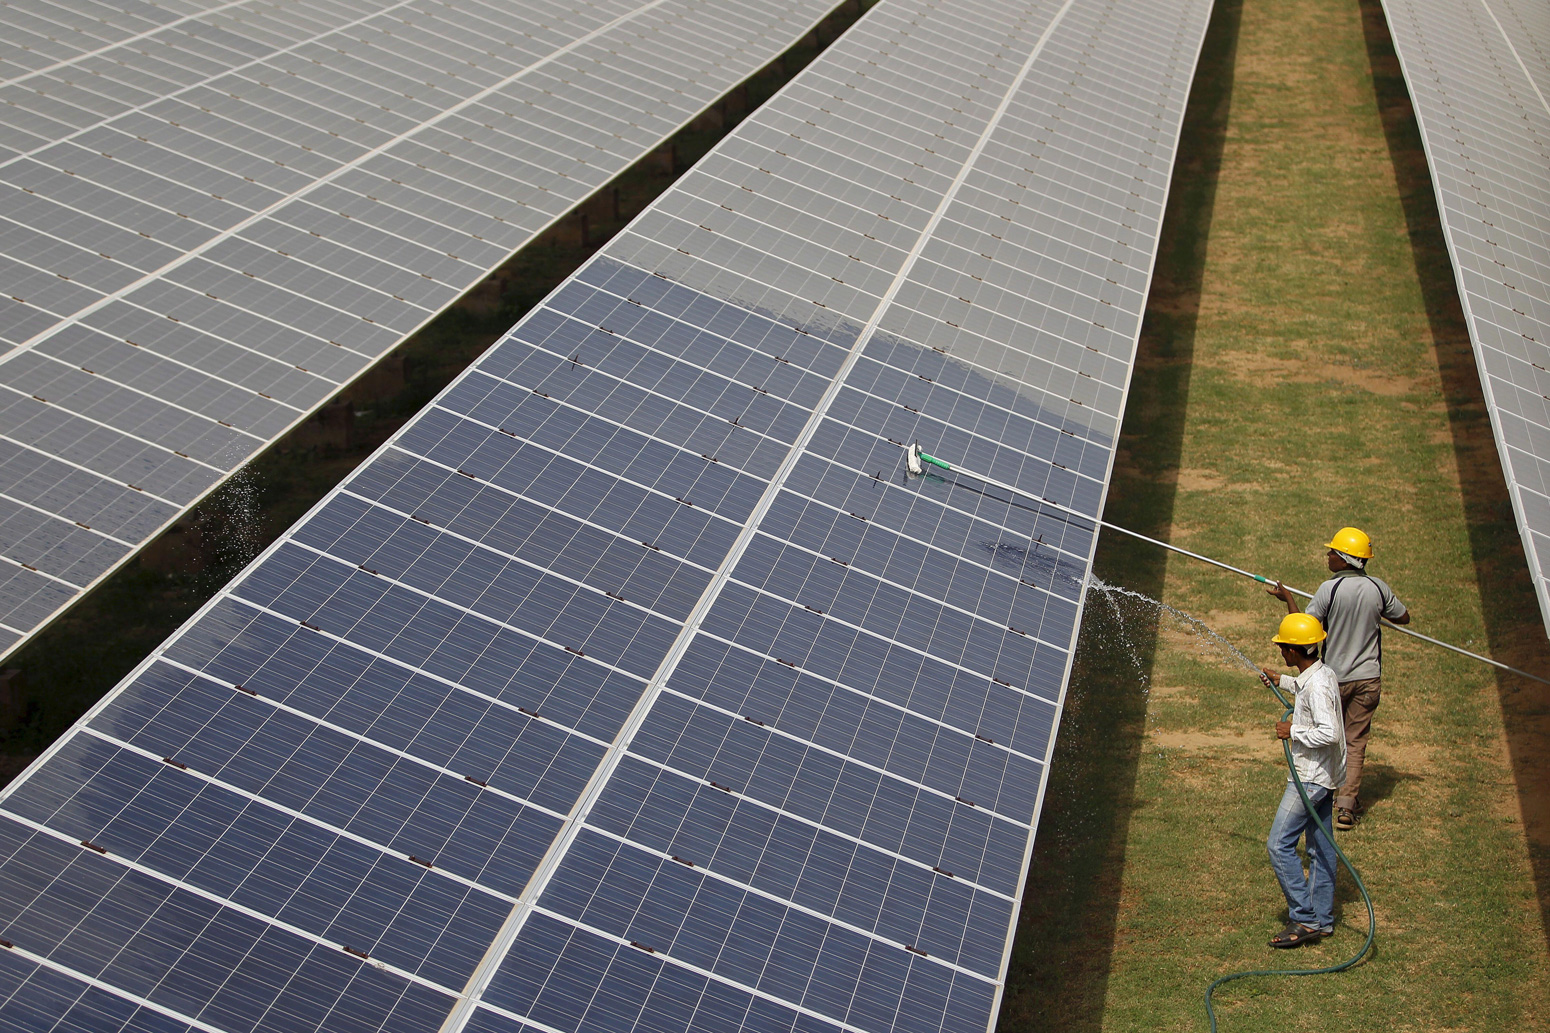 Solar is now 'cheapest electricity in history', confirms IEA